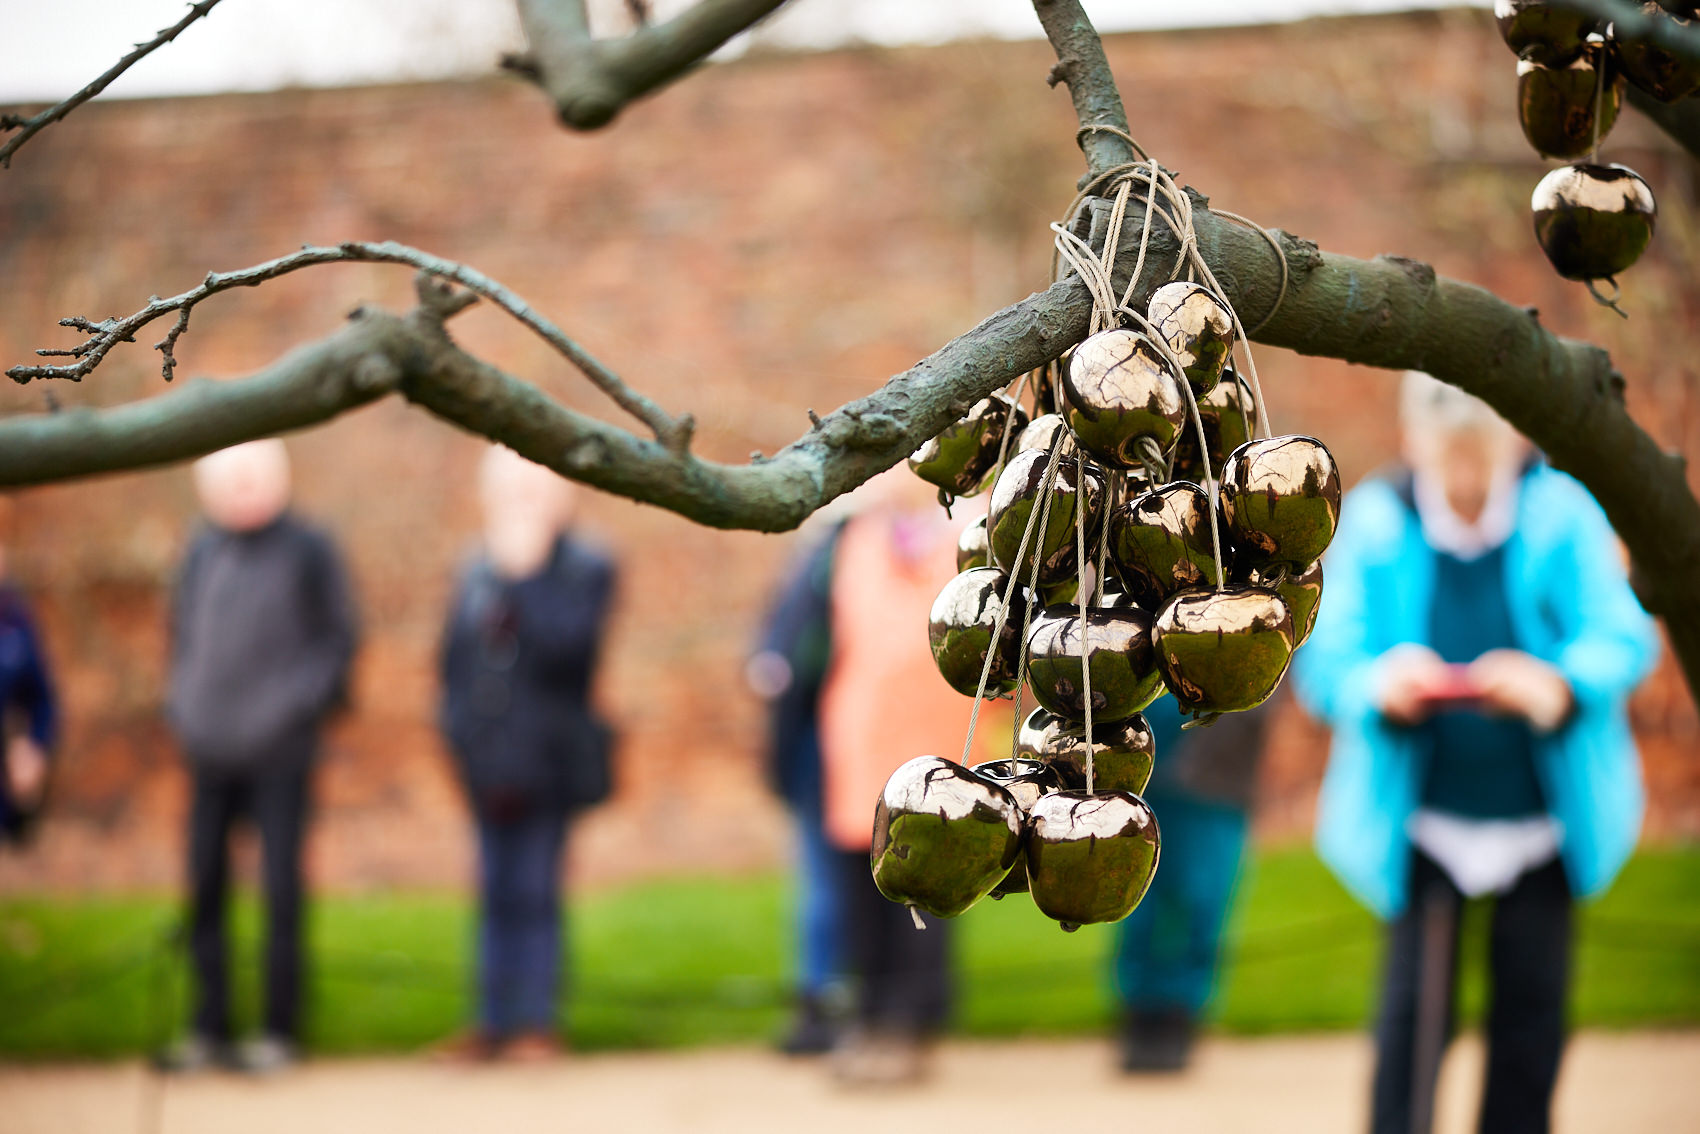 People taking photos of golden appled hanging from a branch